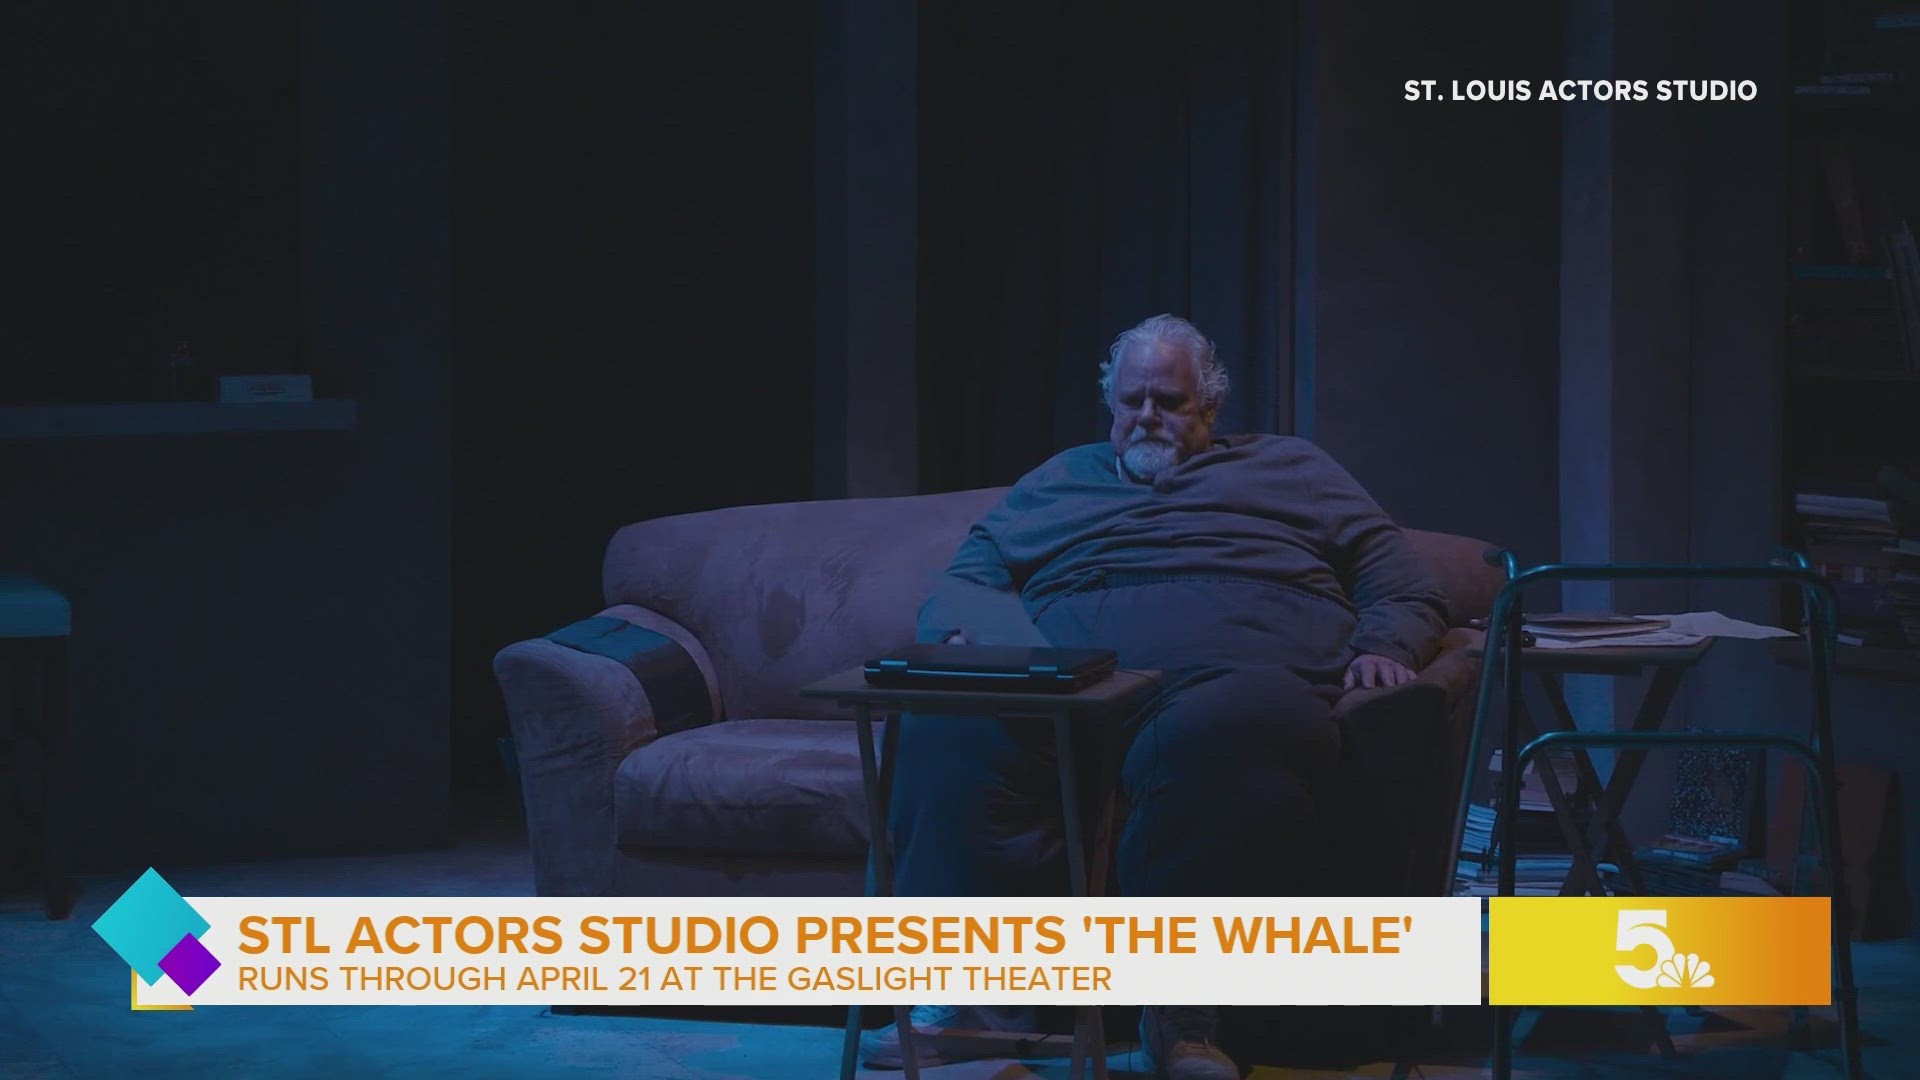 'The Whale' continues through April 21 at the Gaslight Theater.